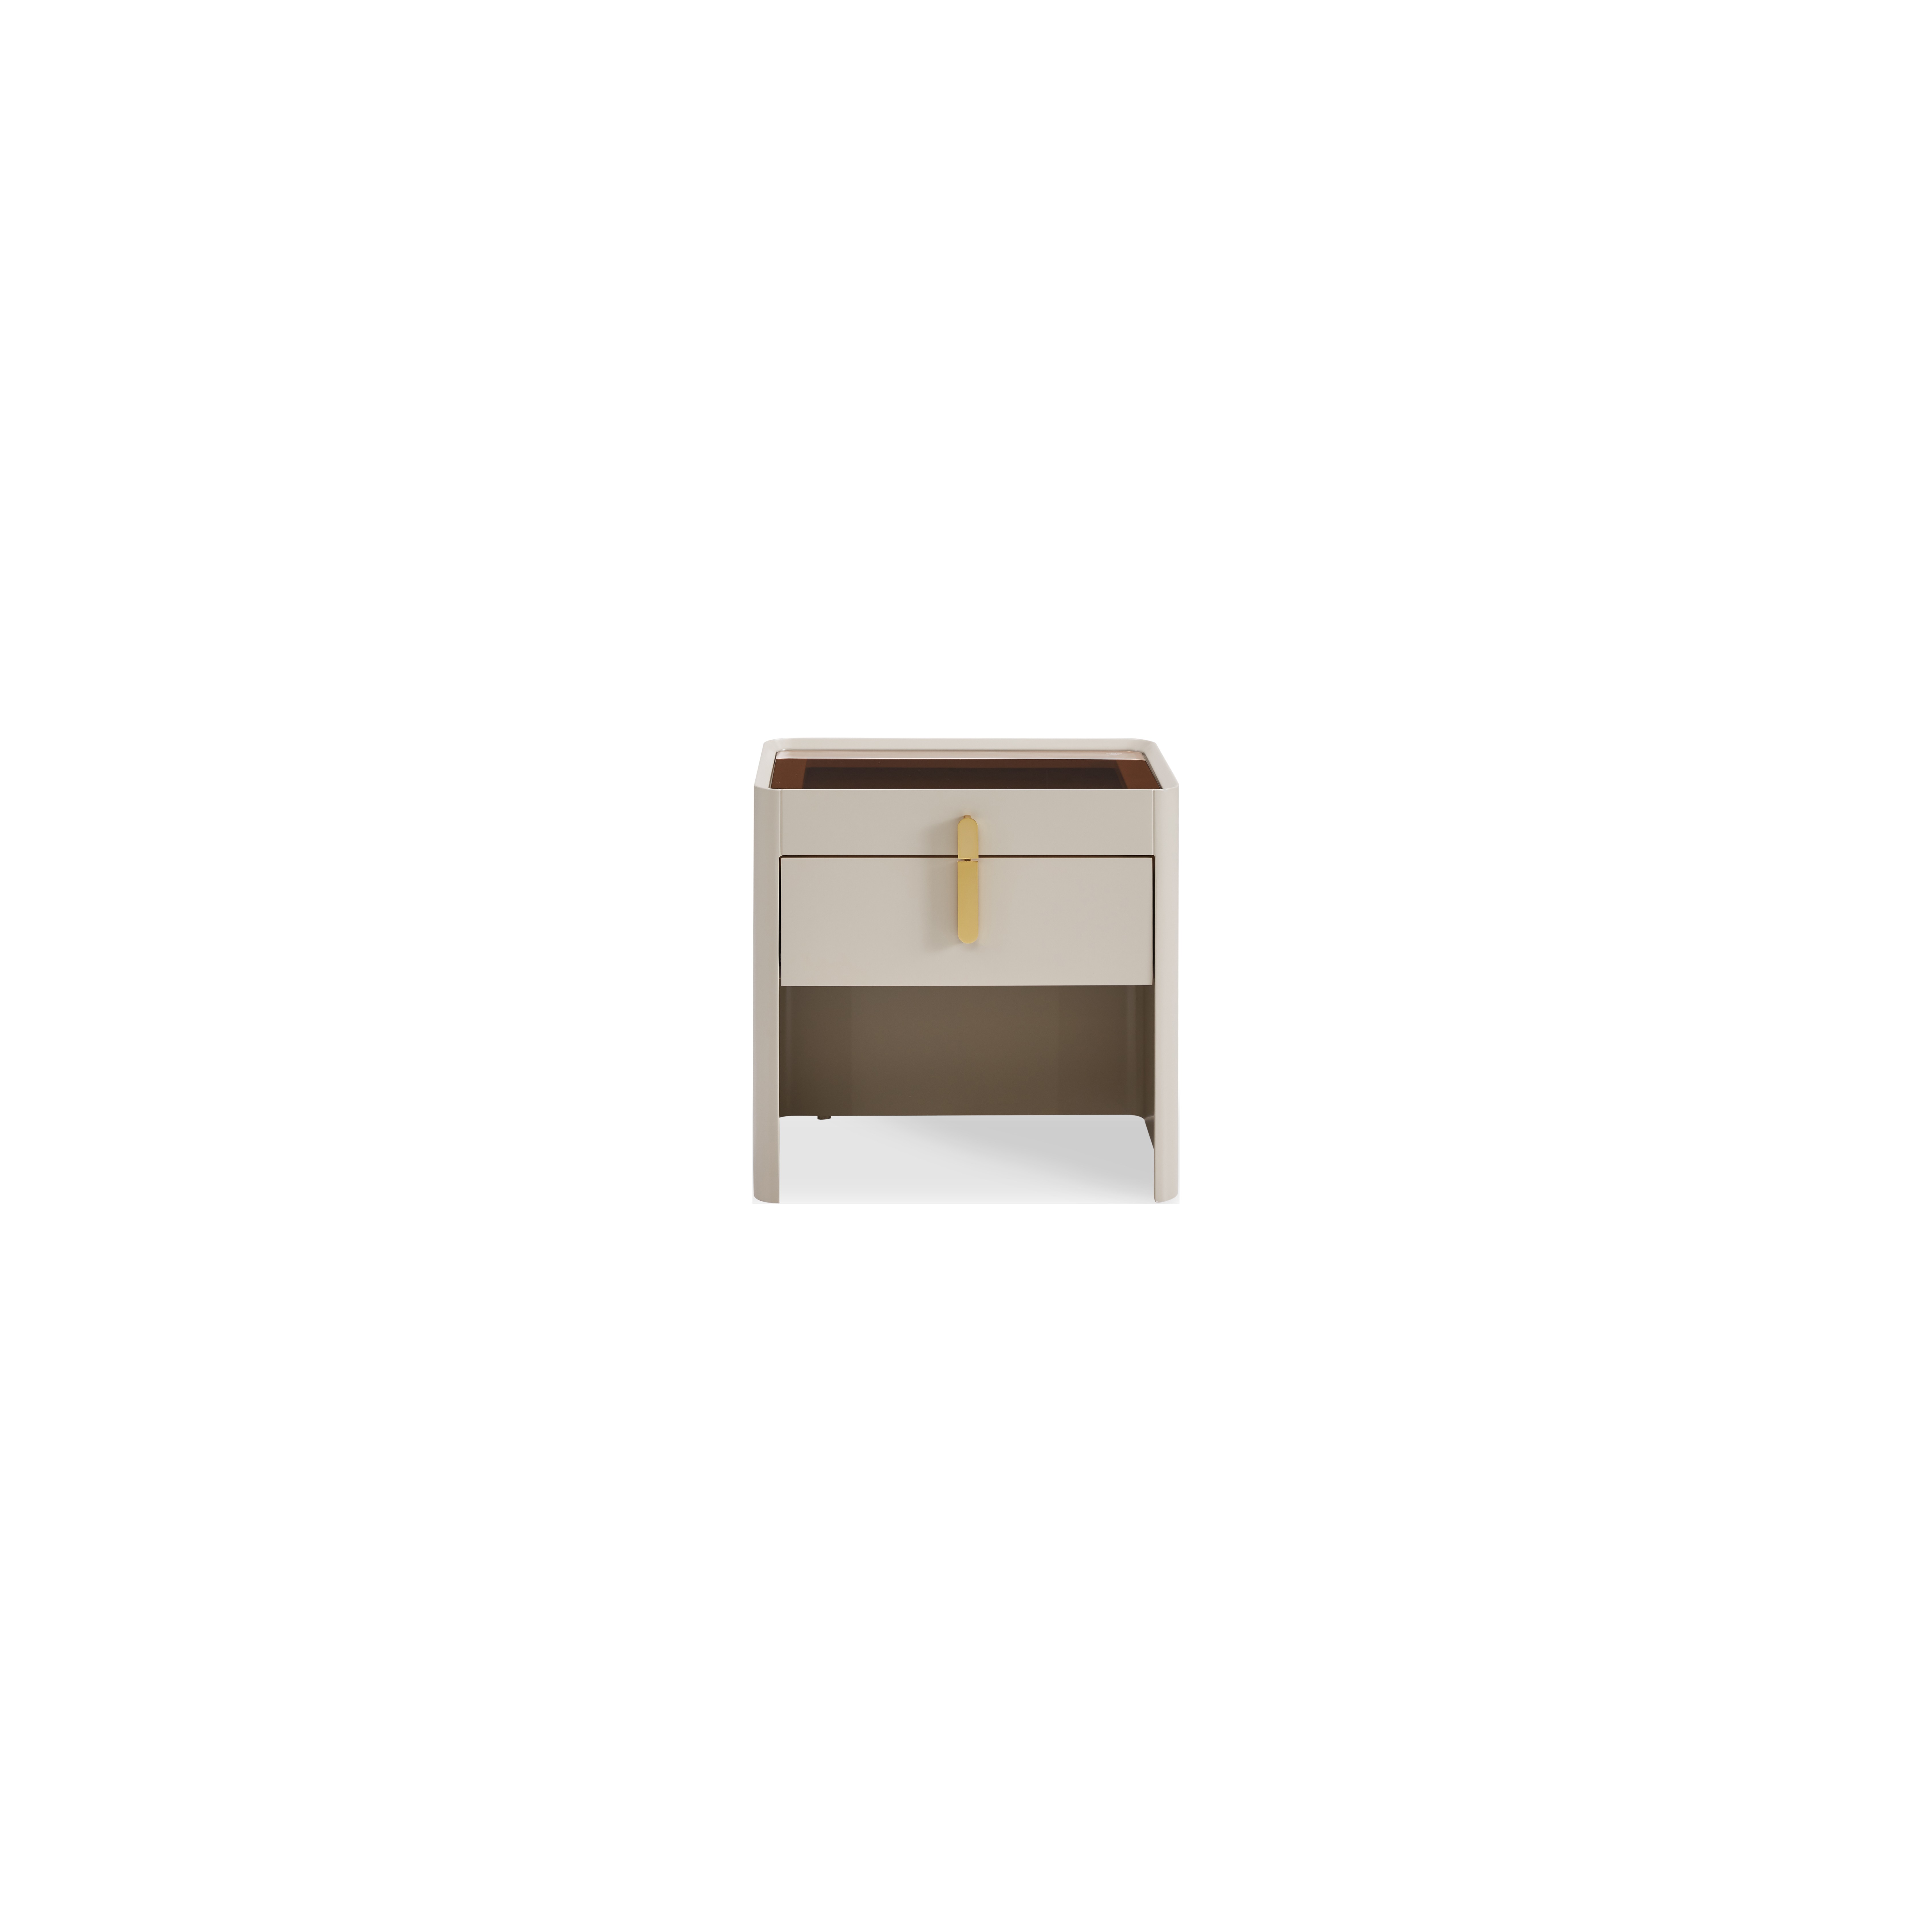 Contemporary Mix And Match Colors MDF Board Veneer Home Design Storage Box Cabinet Nightstand Bedside Tables for Home Design